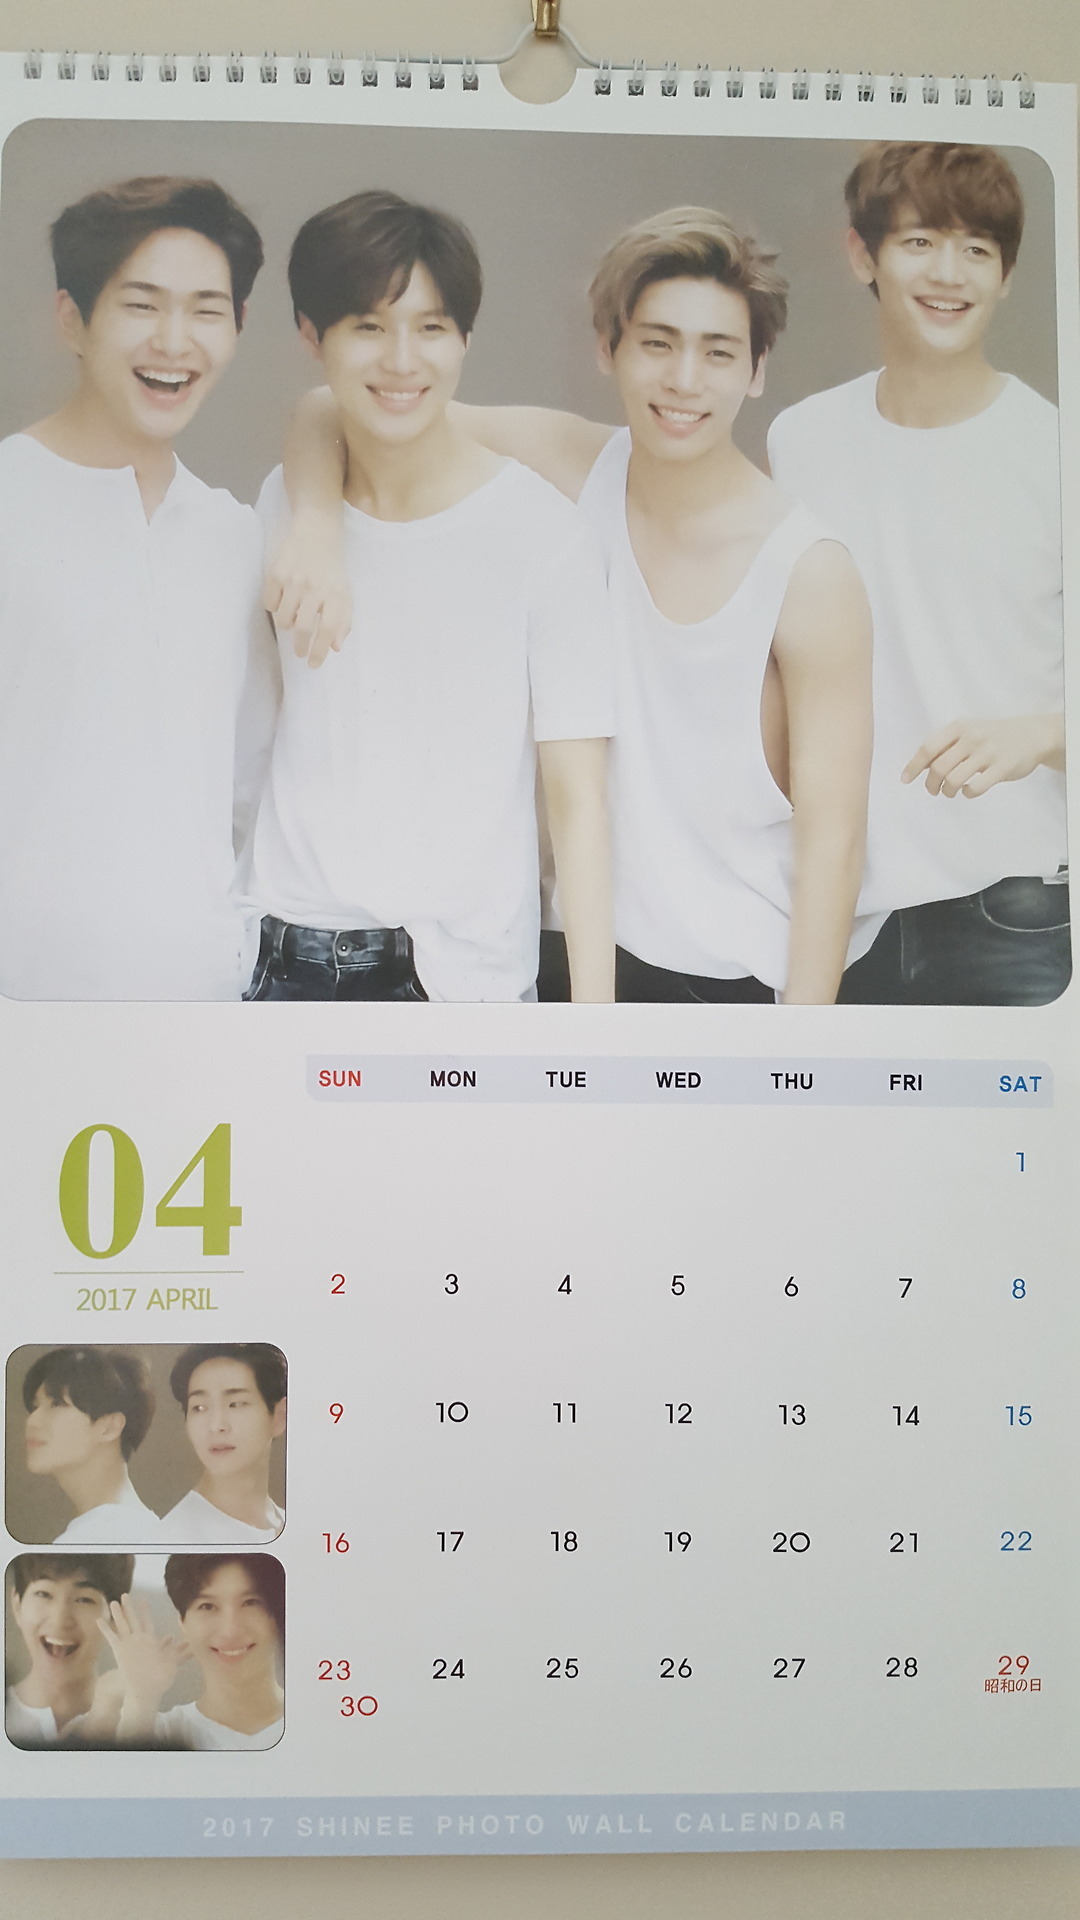 I was so excited to flip my SHINee calendar to April but I was greeted by some kind of April Fool’s bs. I was like, awww, they’re so adora-WHERETHEFUCKISKEY!?